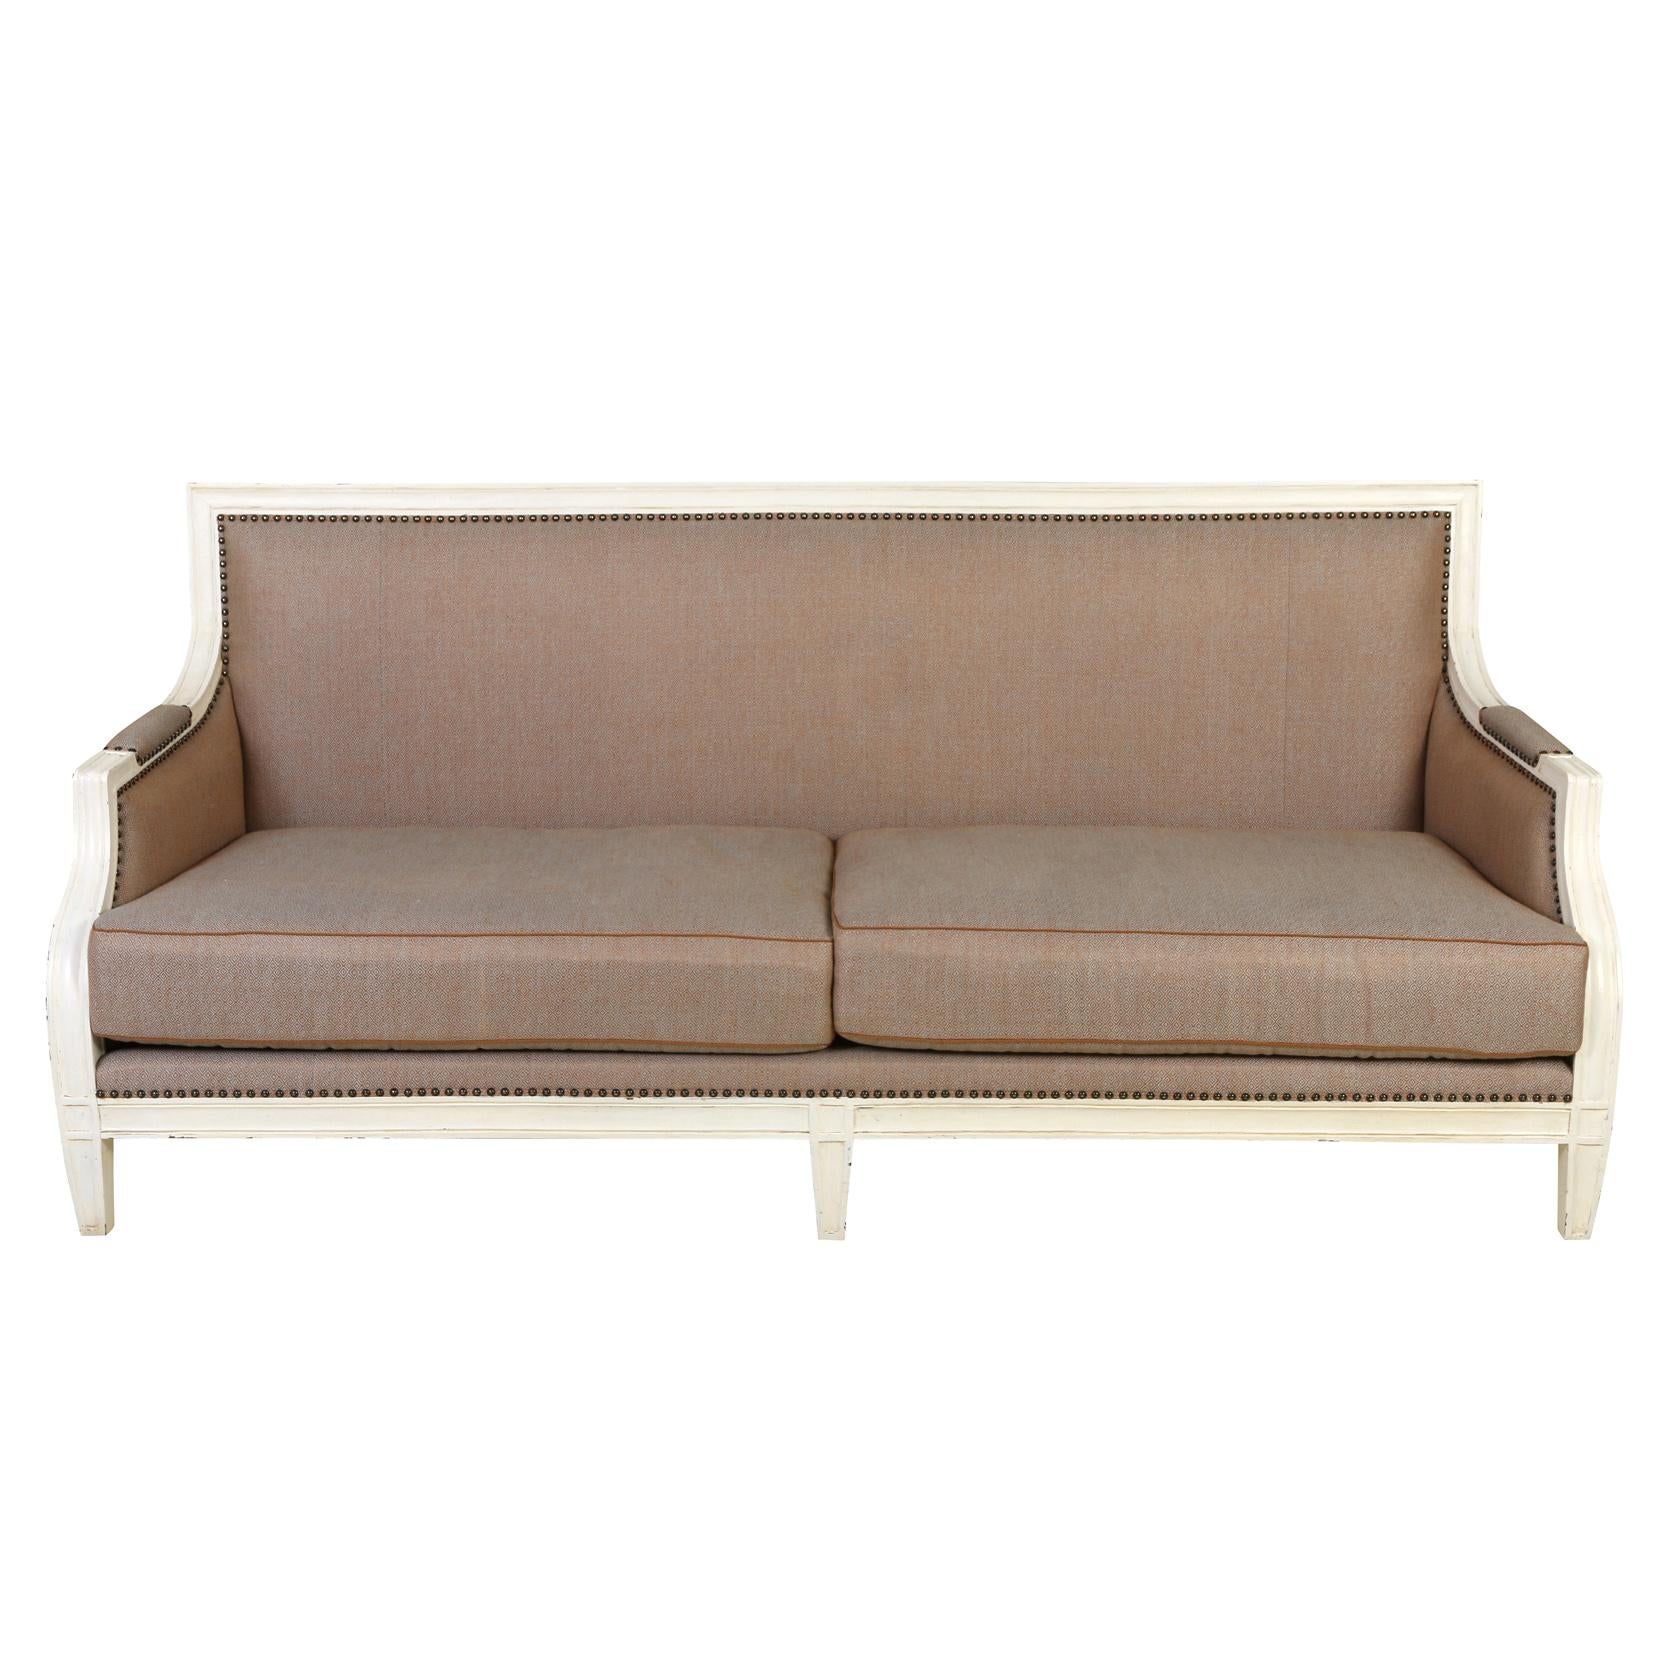 French White Frame Sofa with Beige Upholstery In Good Condition For Sale In Locust Valley, NY